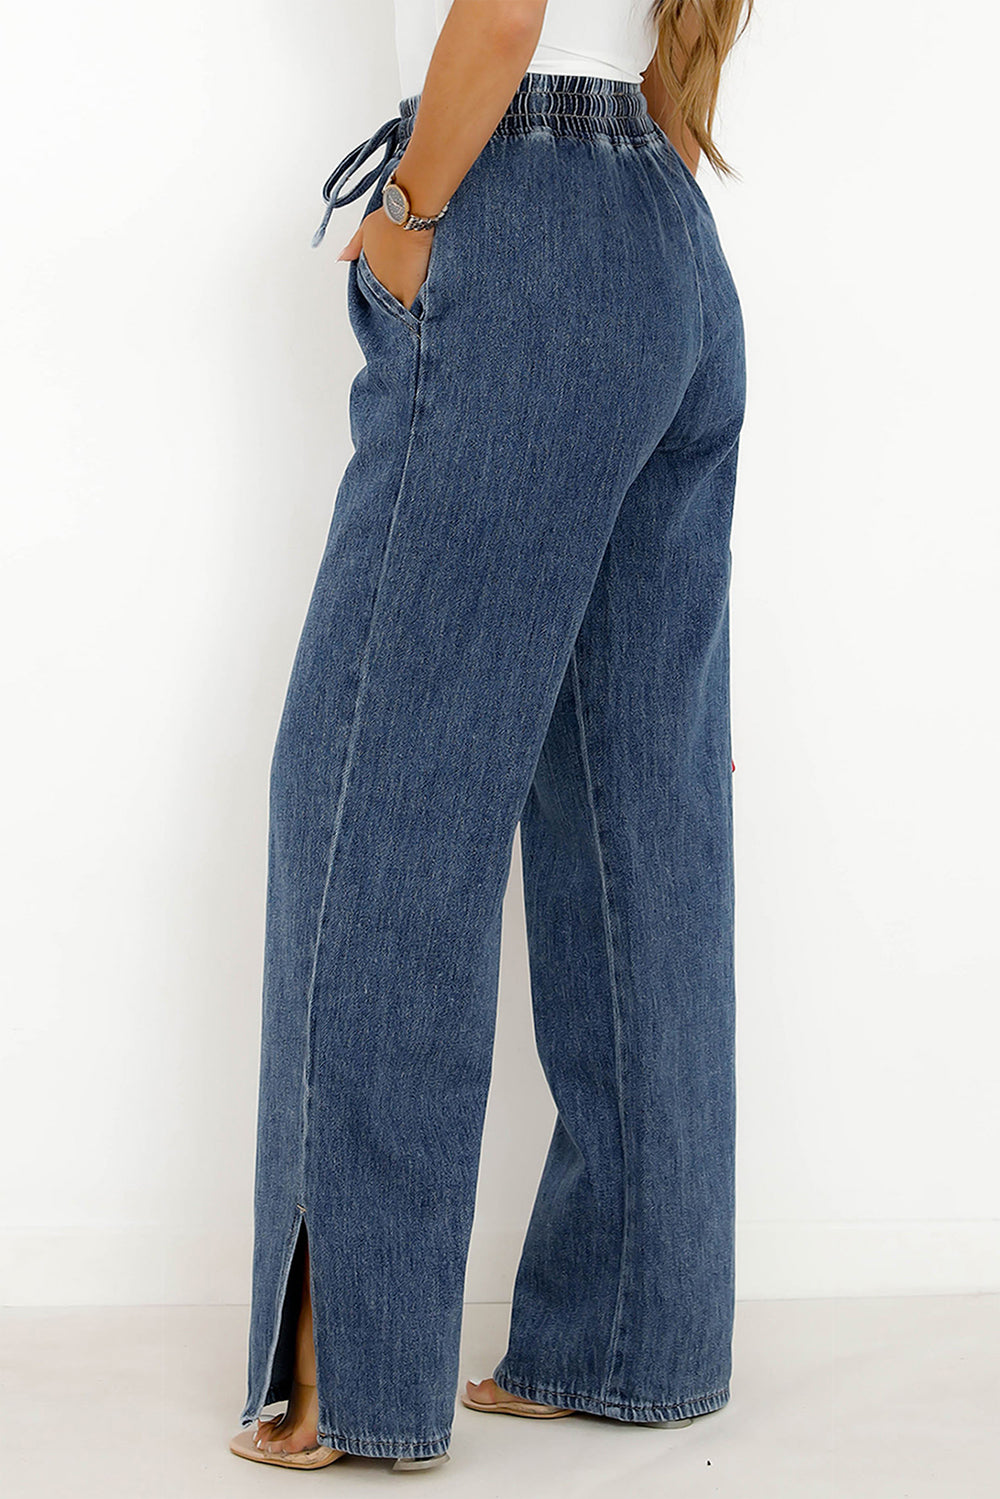 PREORDER- Slit Wide Leg Jeans with Pockets